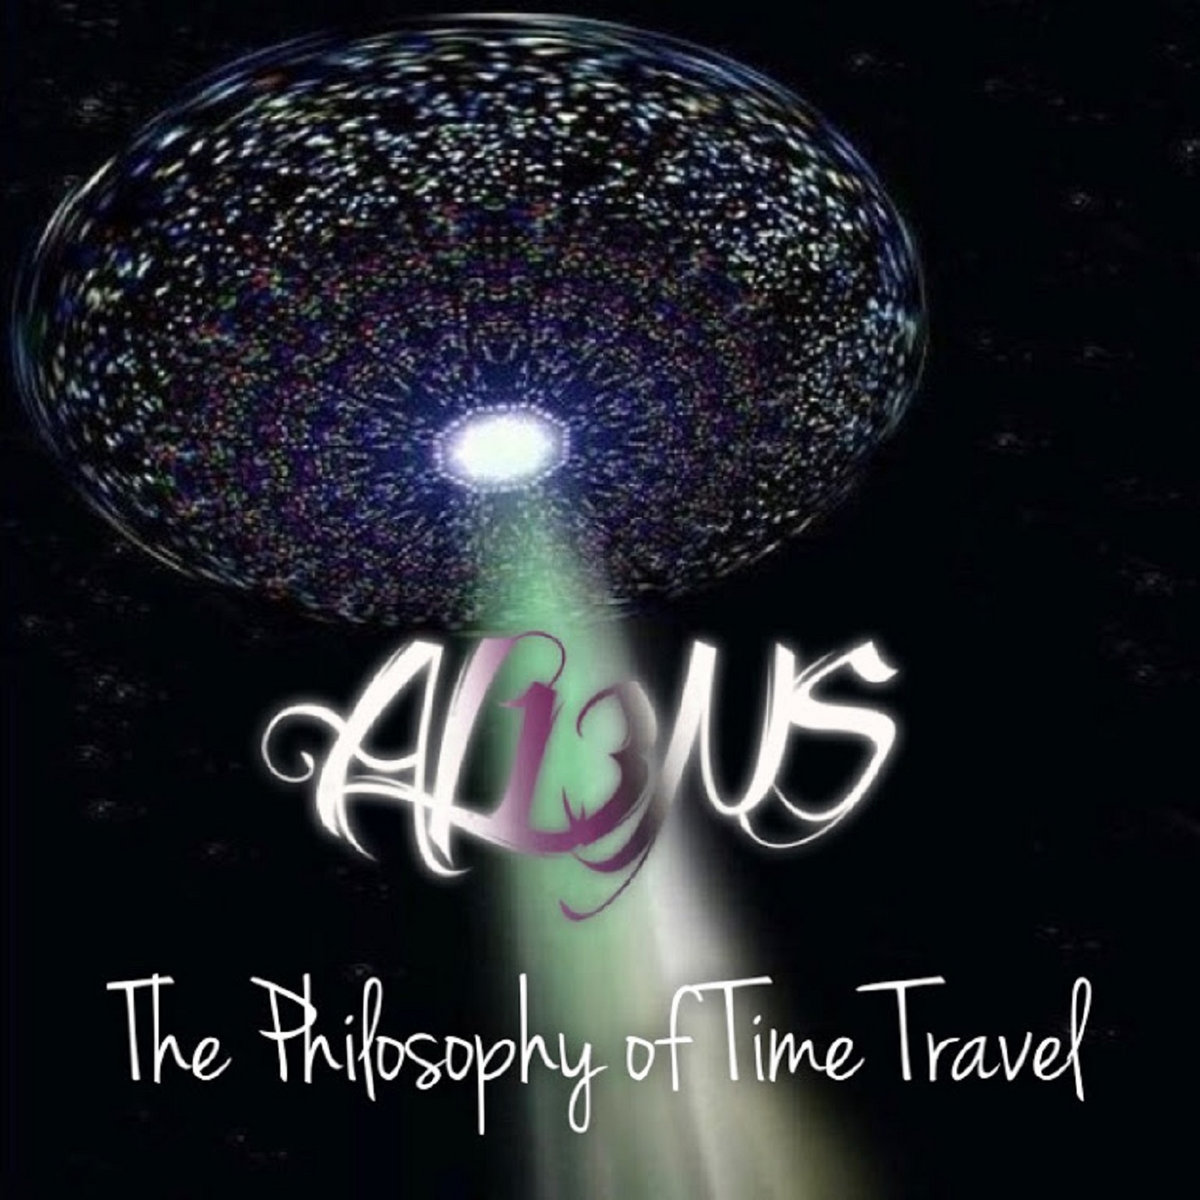 about time travel and philosophy